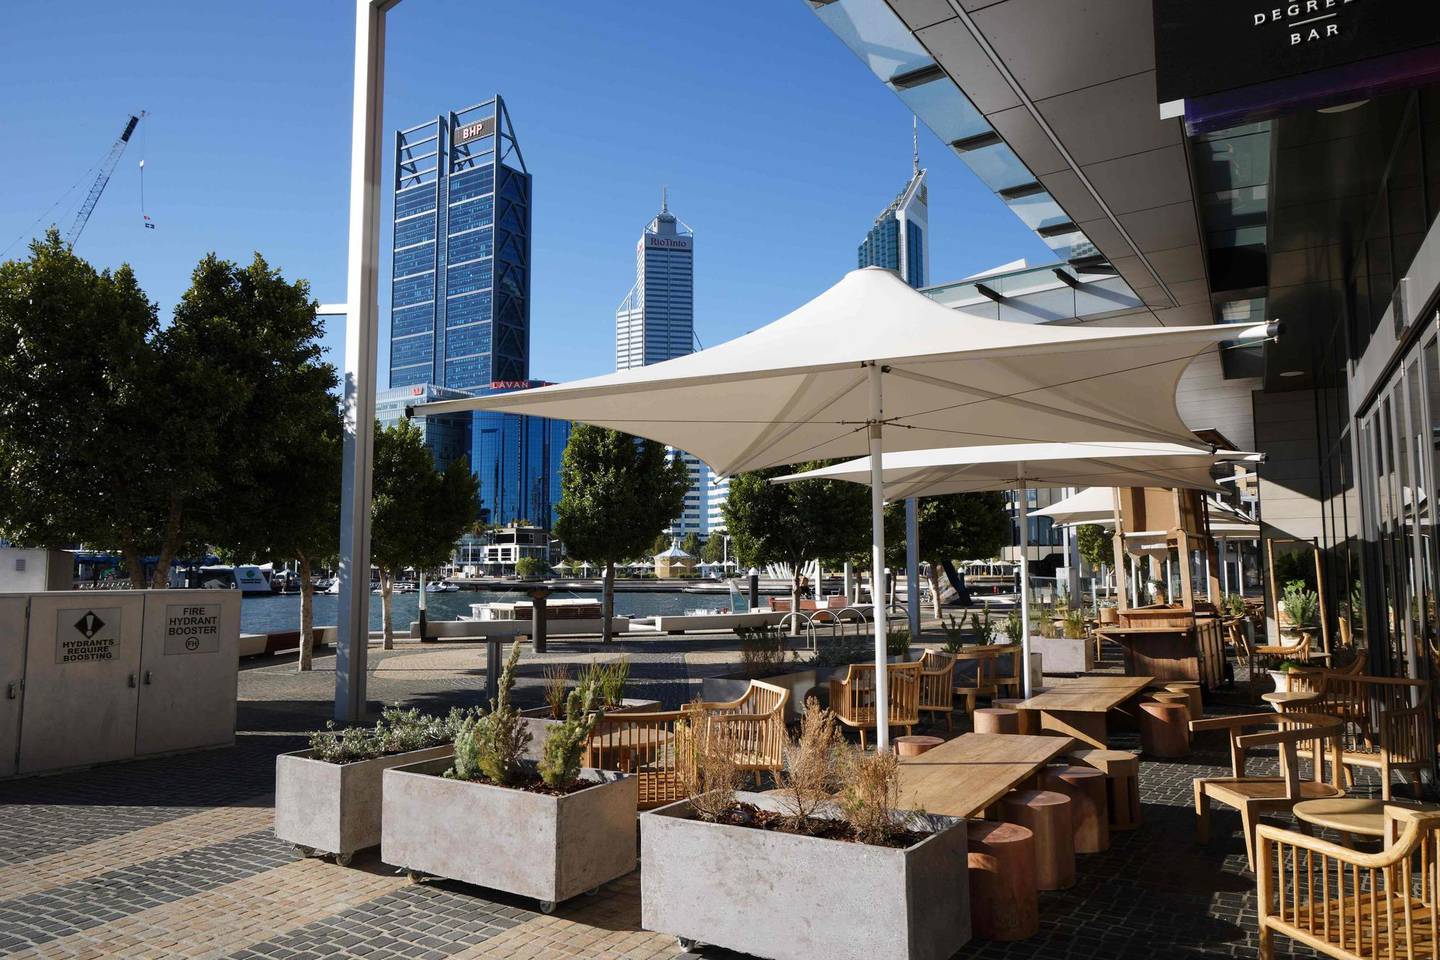 A general view shows an empty restaurant in the normally busy Elizabeth Quay area in Perth on January 31, 2021, as authorities announced a snap five-day lockdown after a security guard at a quarantine hotel tested positive for Covid-19 ending Western Australia's ten month coronavirus-free streak. (Photo by TREVOR COLLENS / AFP)